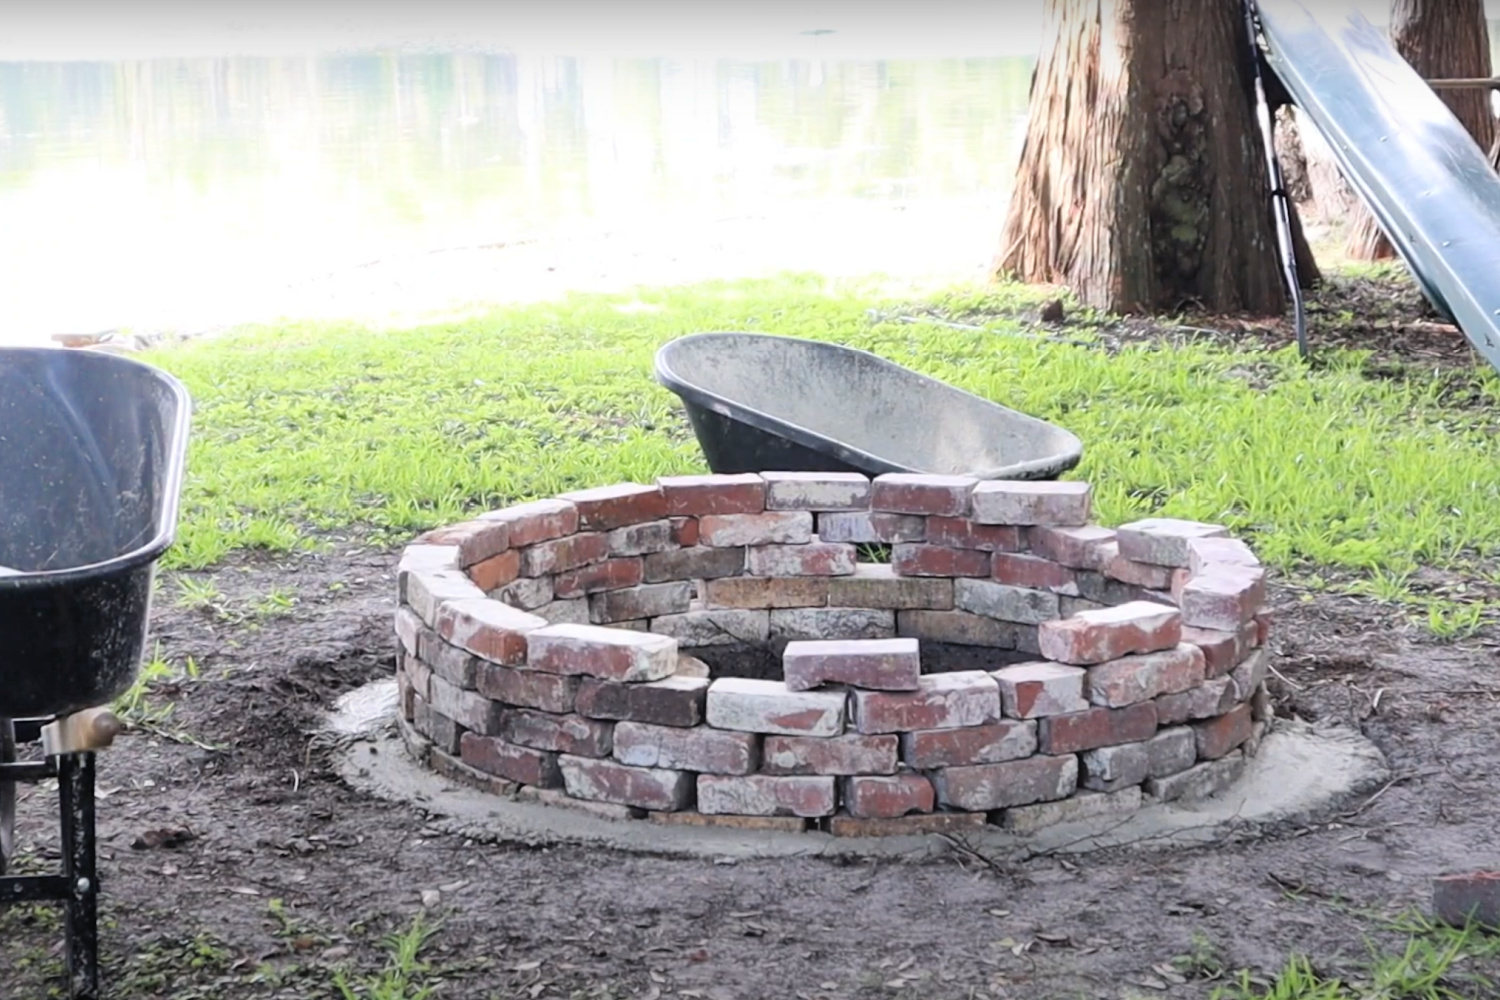 Brick Fire Pit Ideas Diy Diy fire pit ideas: 23 brillant projects you can do yourself